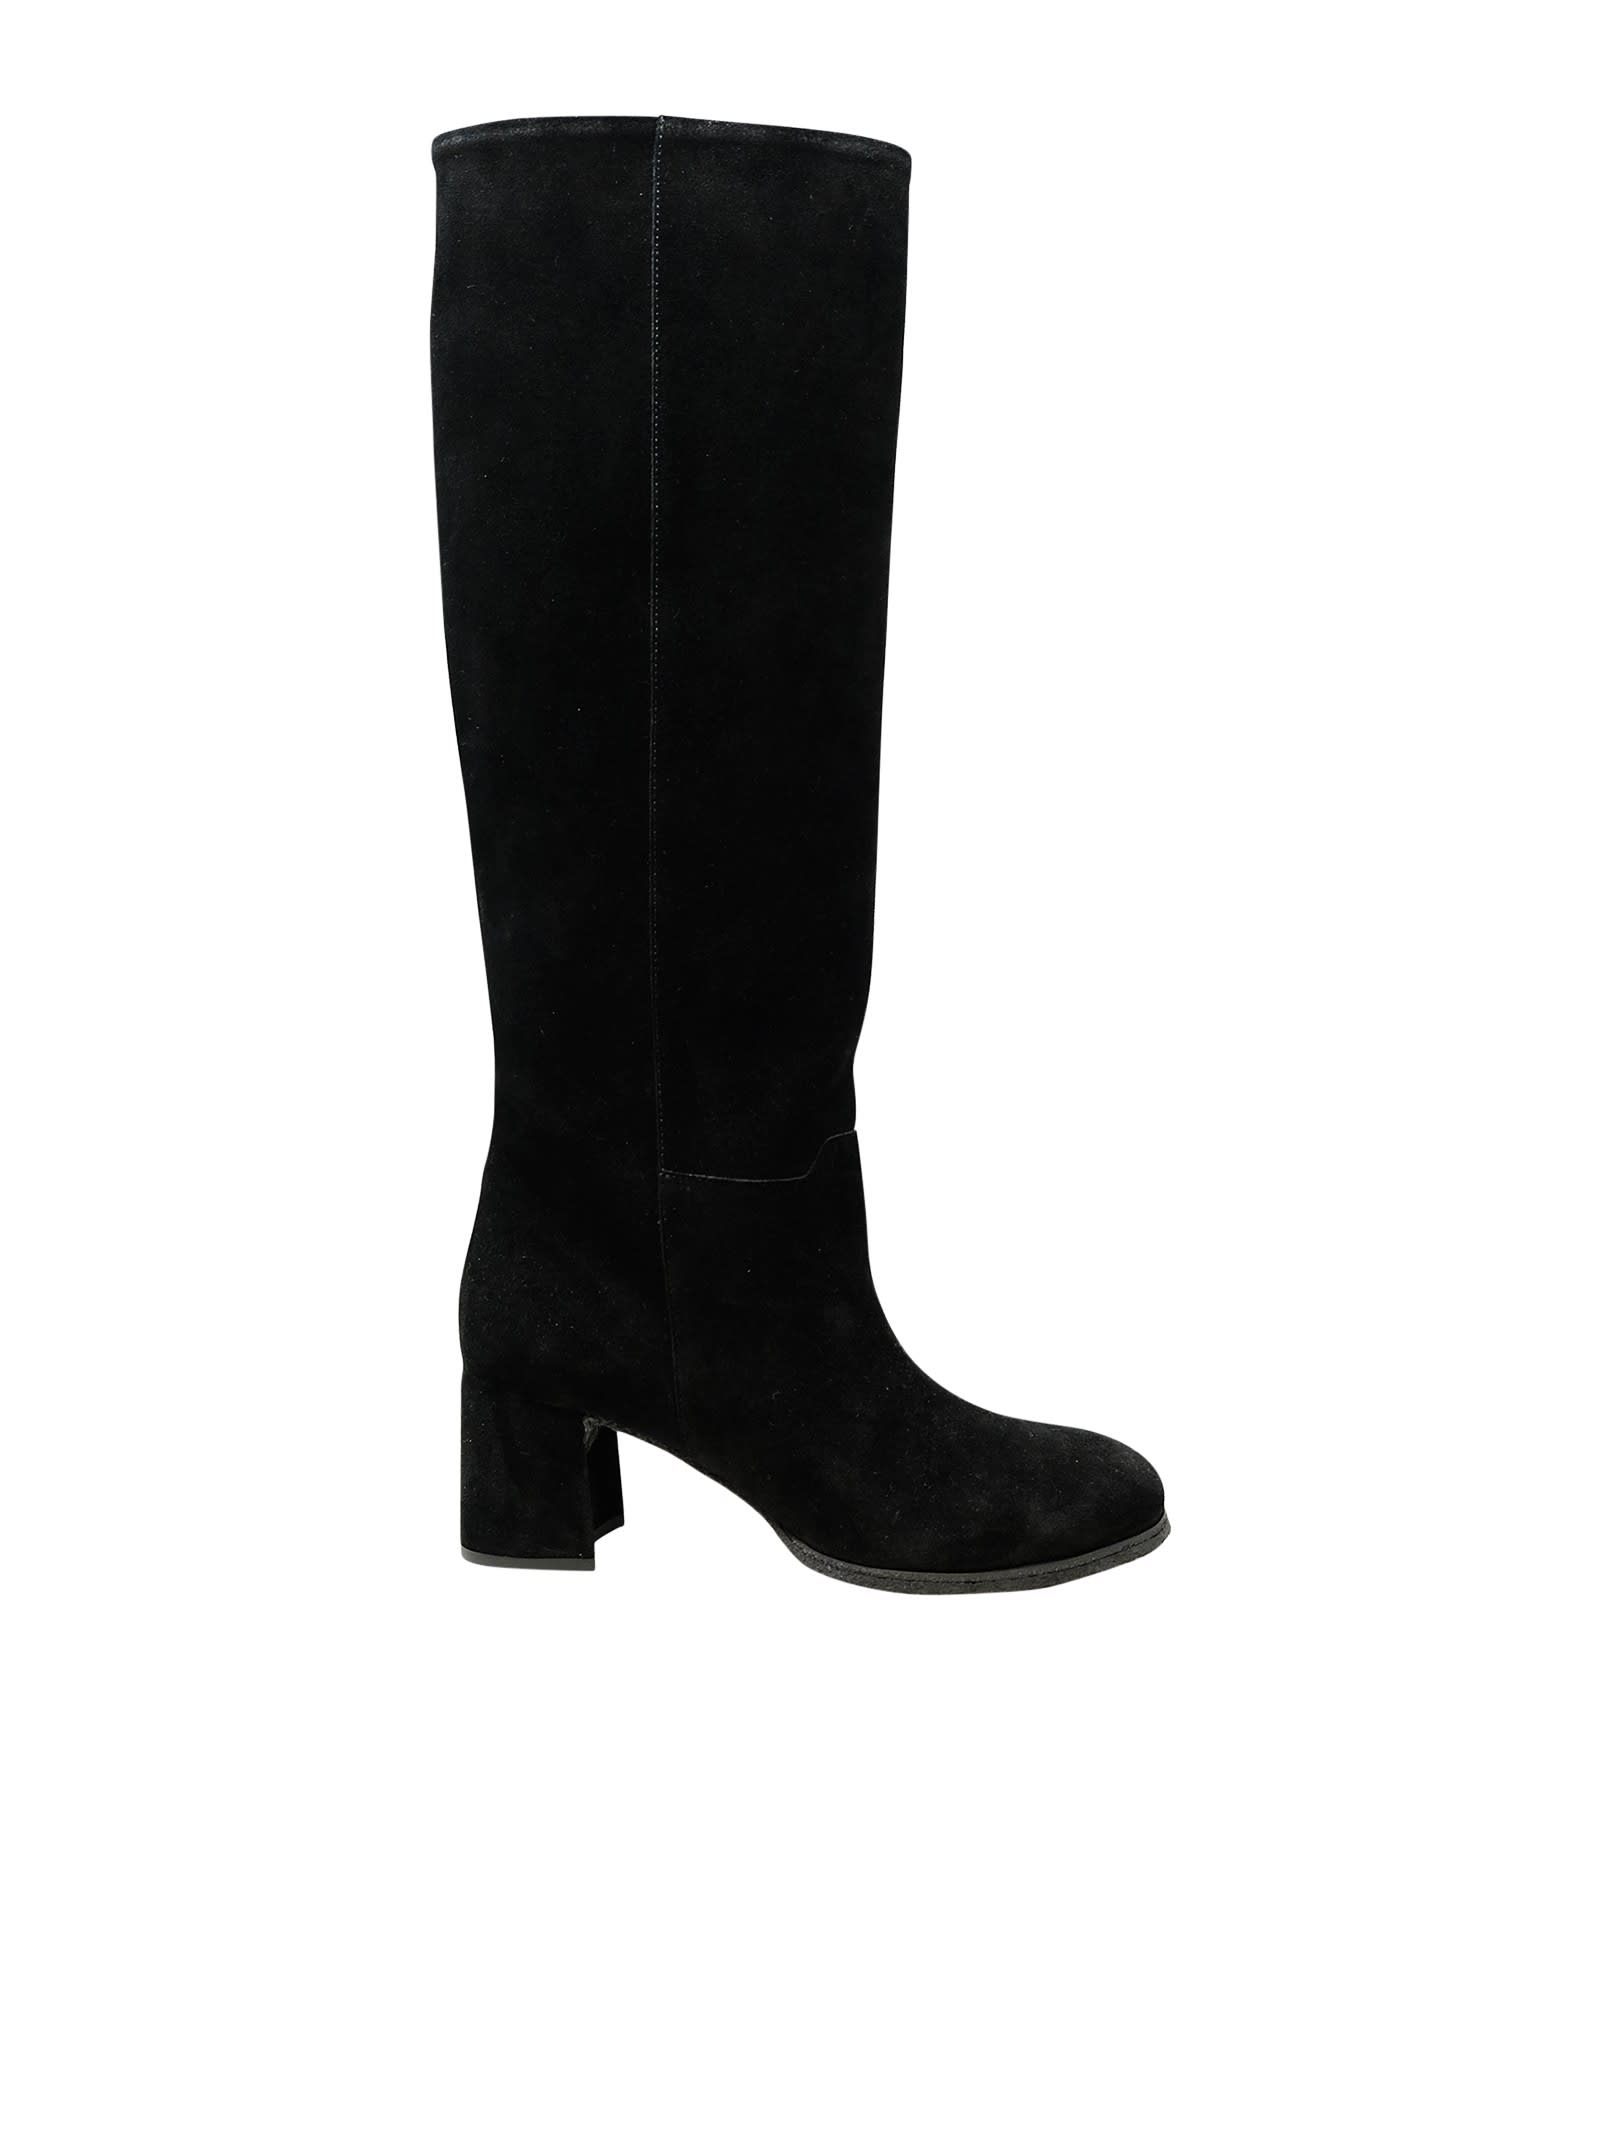 Del Carlo Dressing Gownrto  Dafne Black Suede Ankle Boots